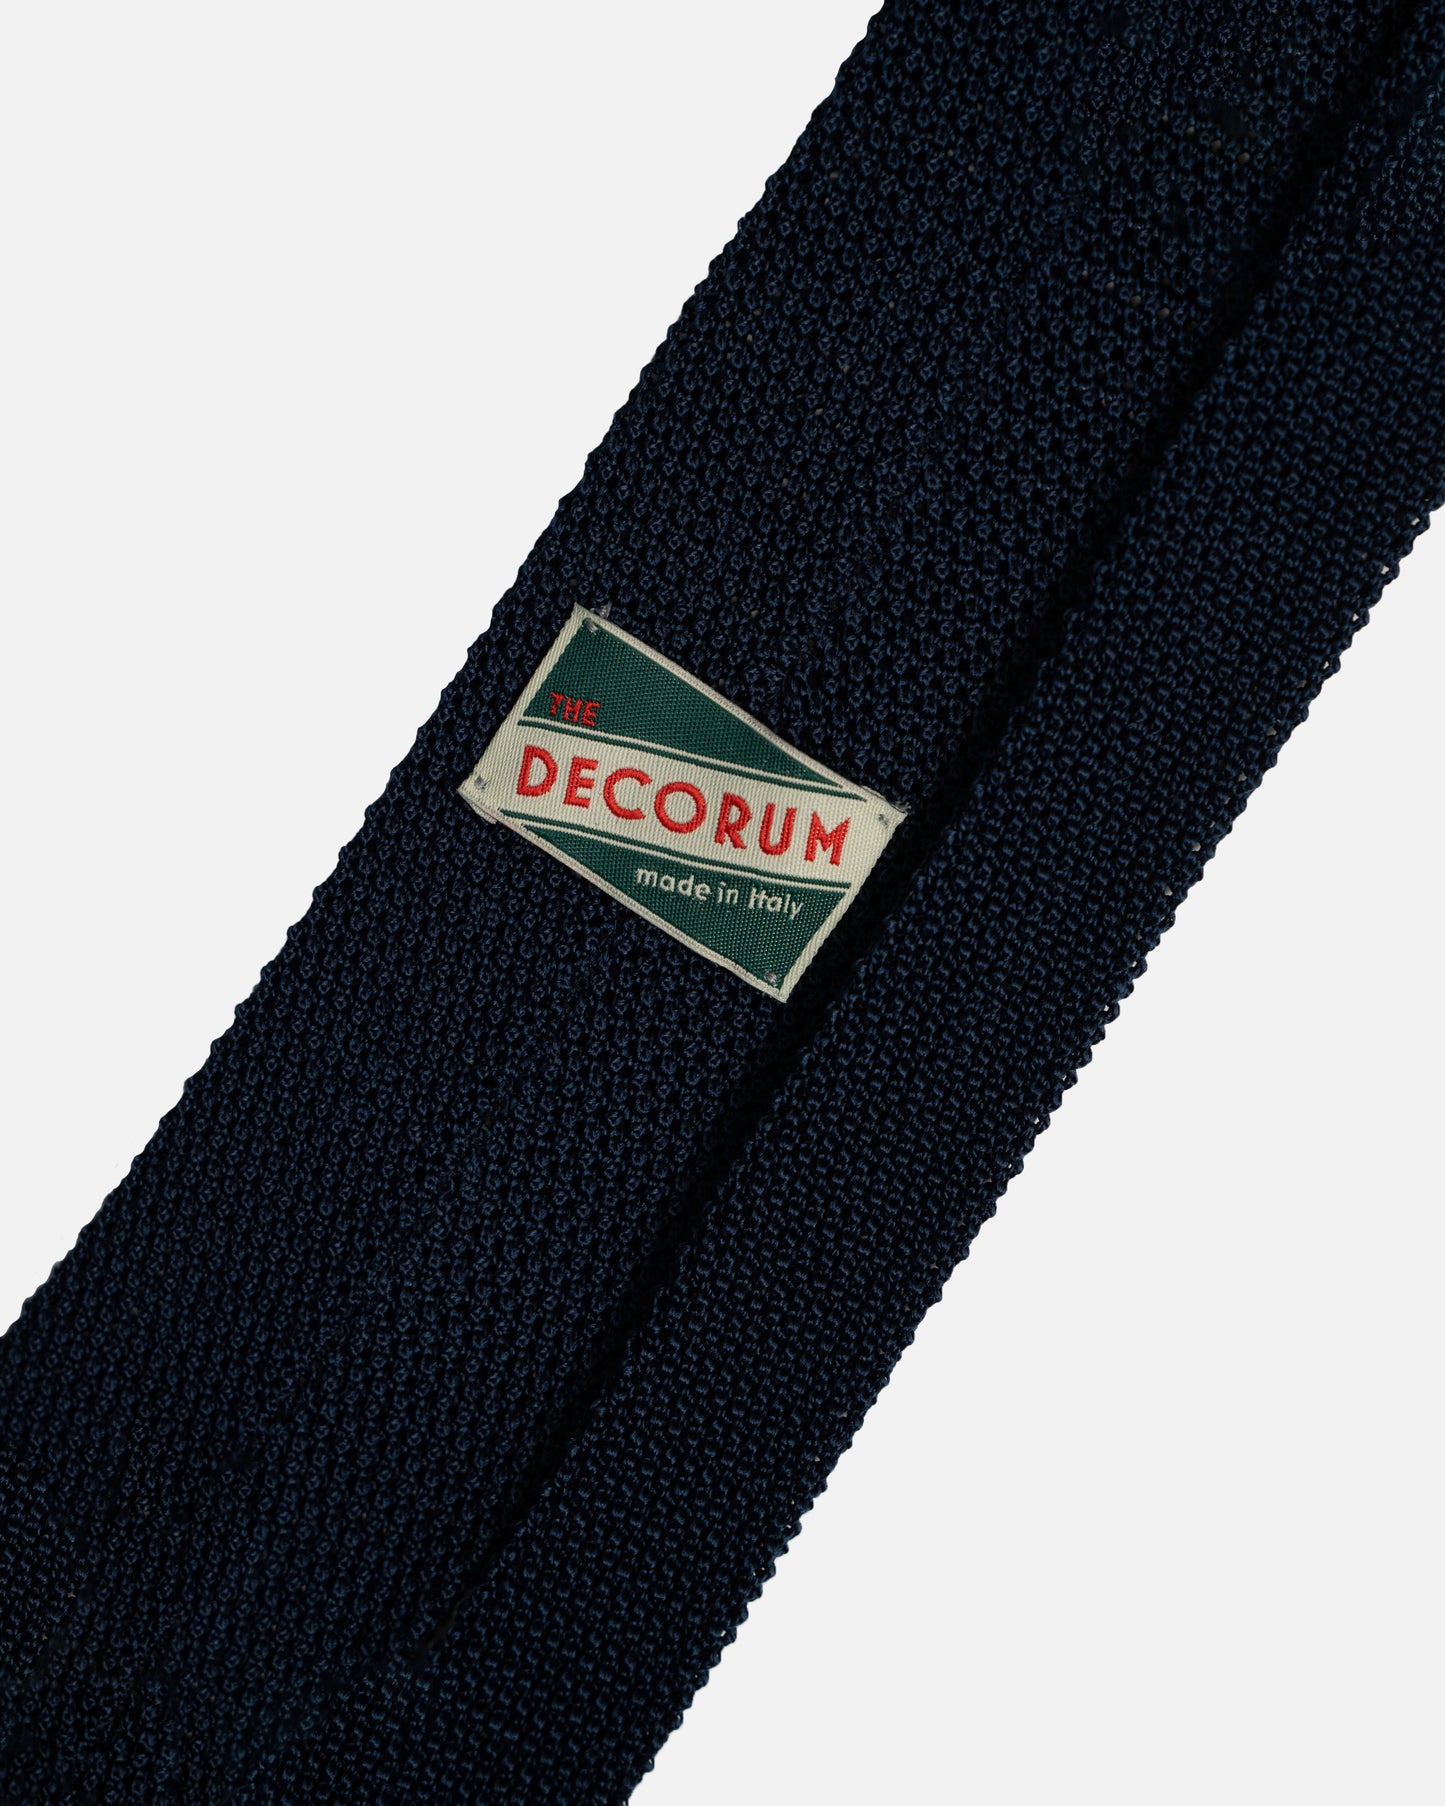 The Decorum Knit Tie in Royal Blue